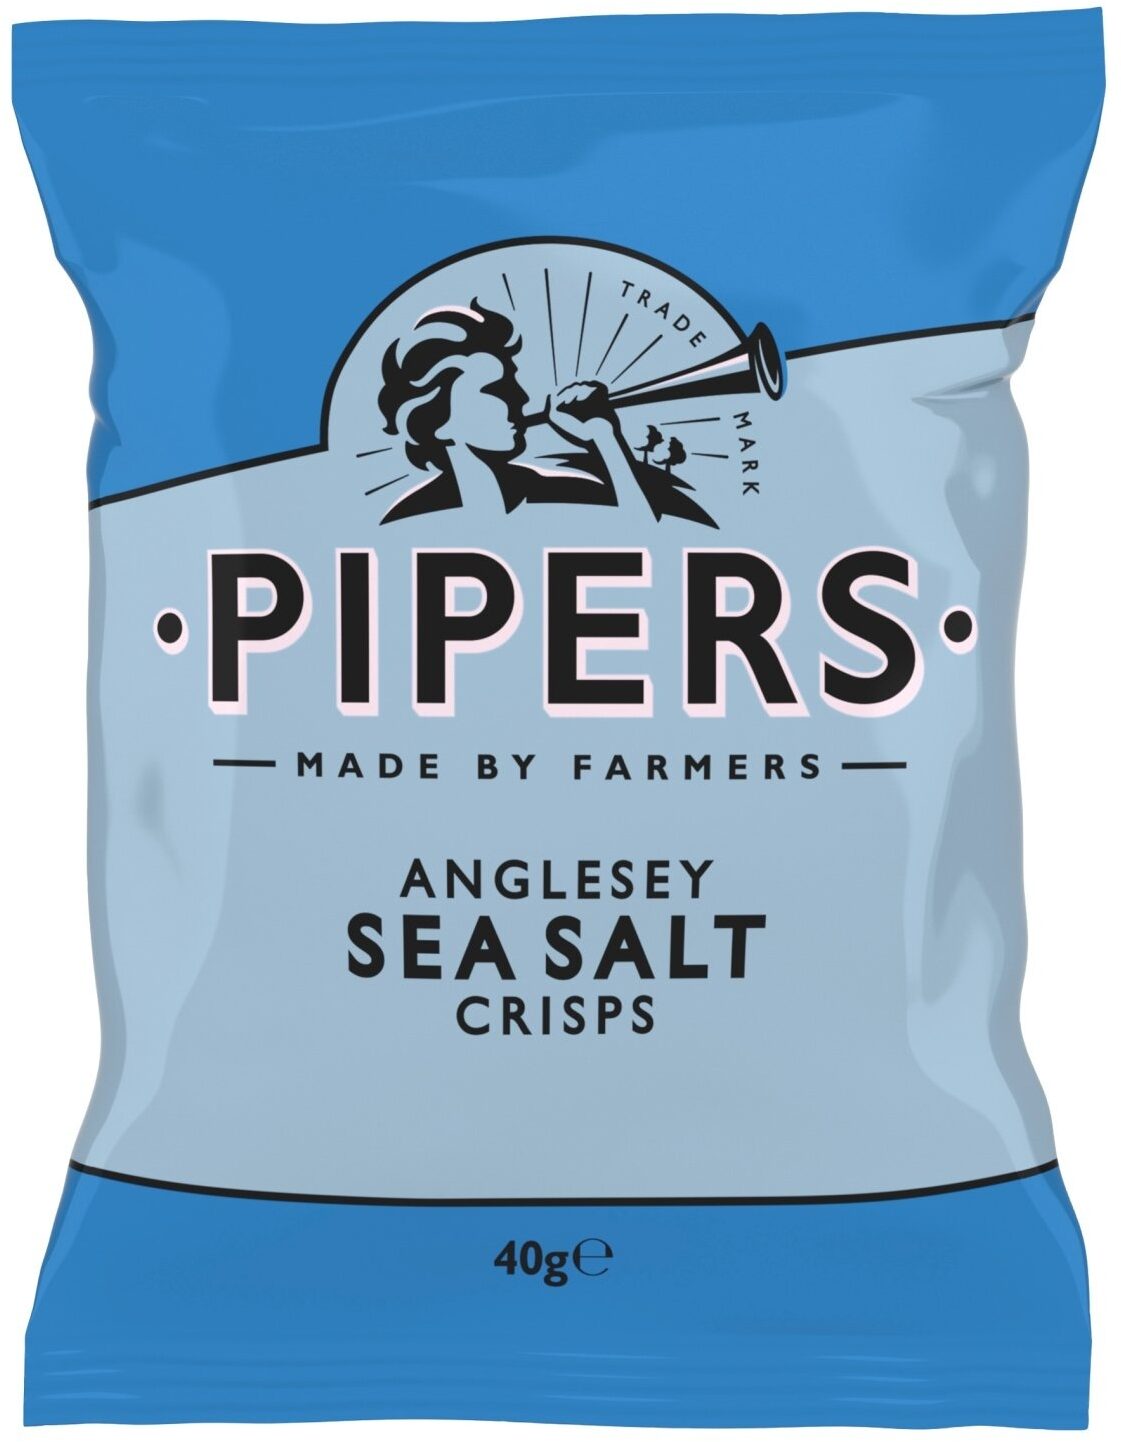 Pipers Anglesey sea salt crisps - Product - fr